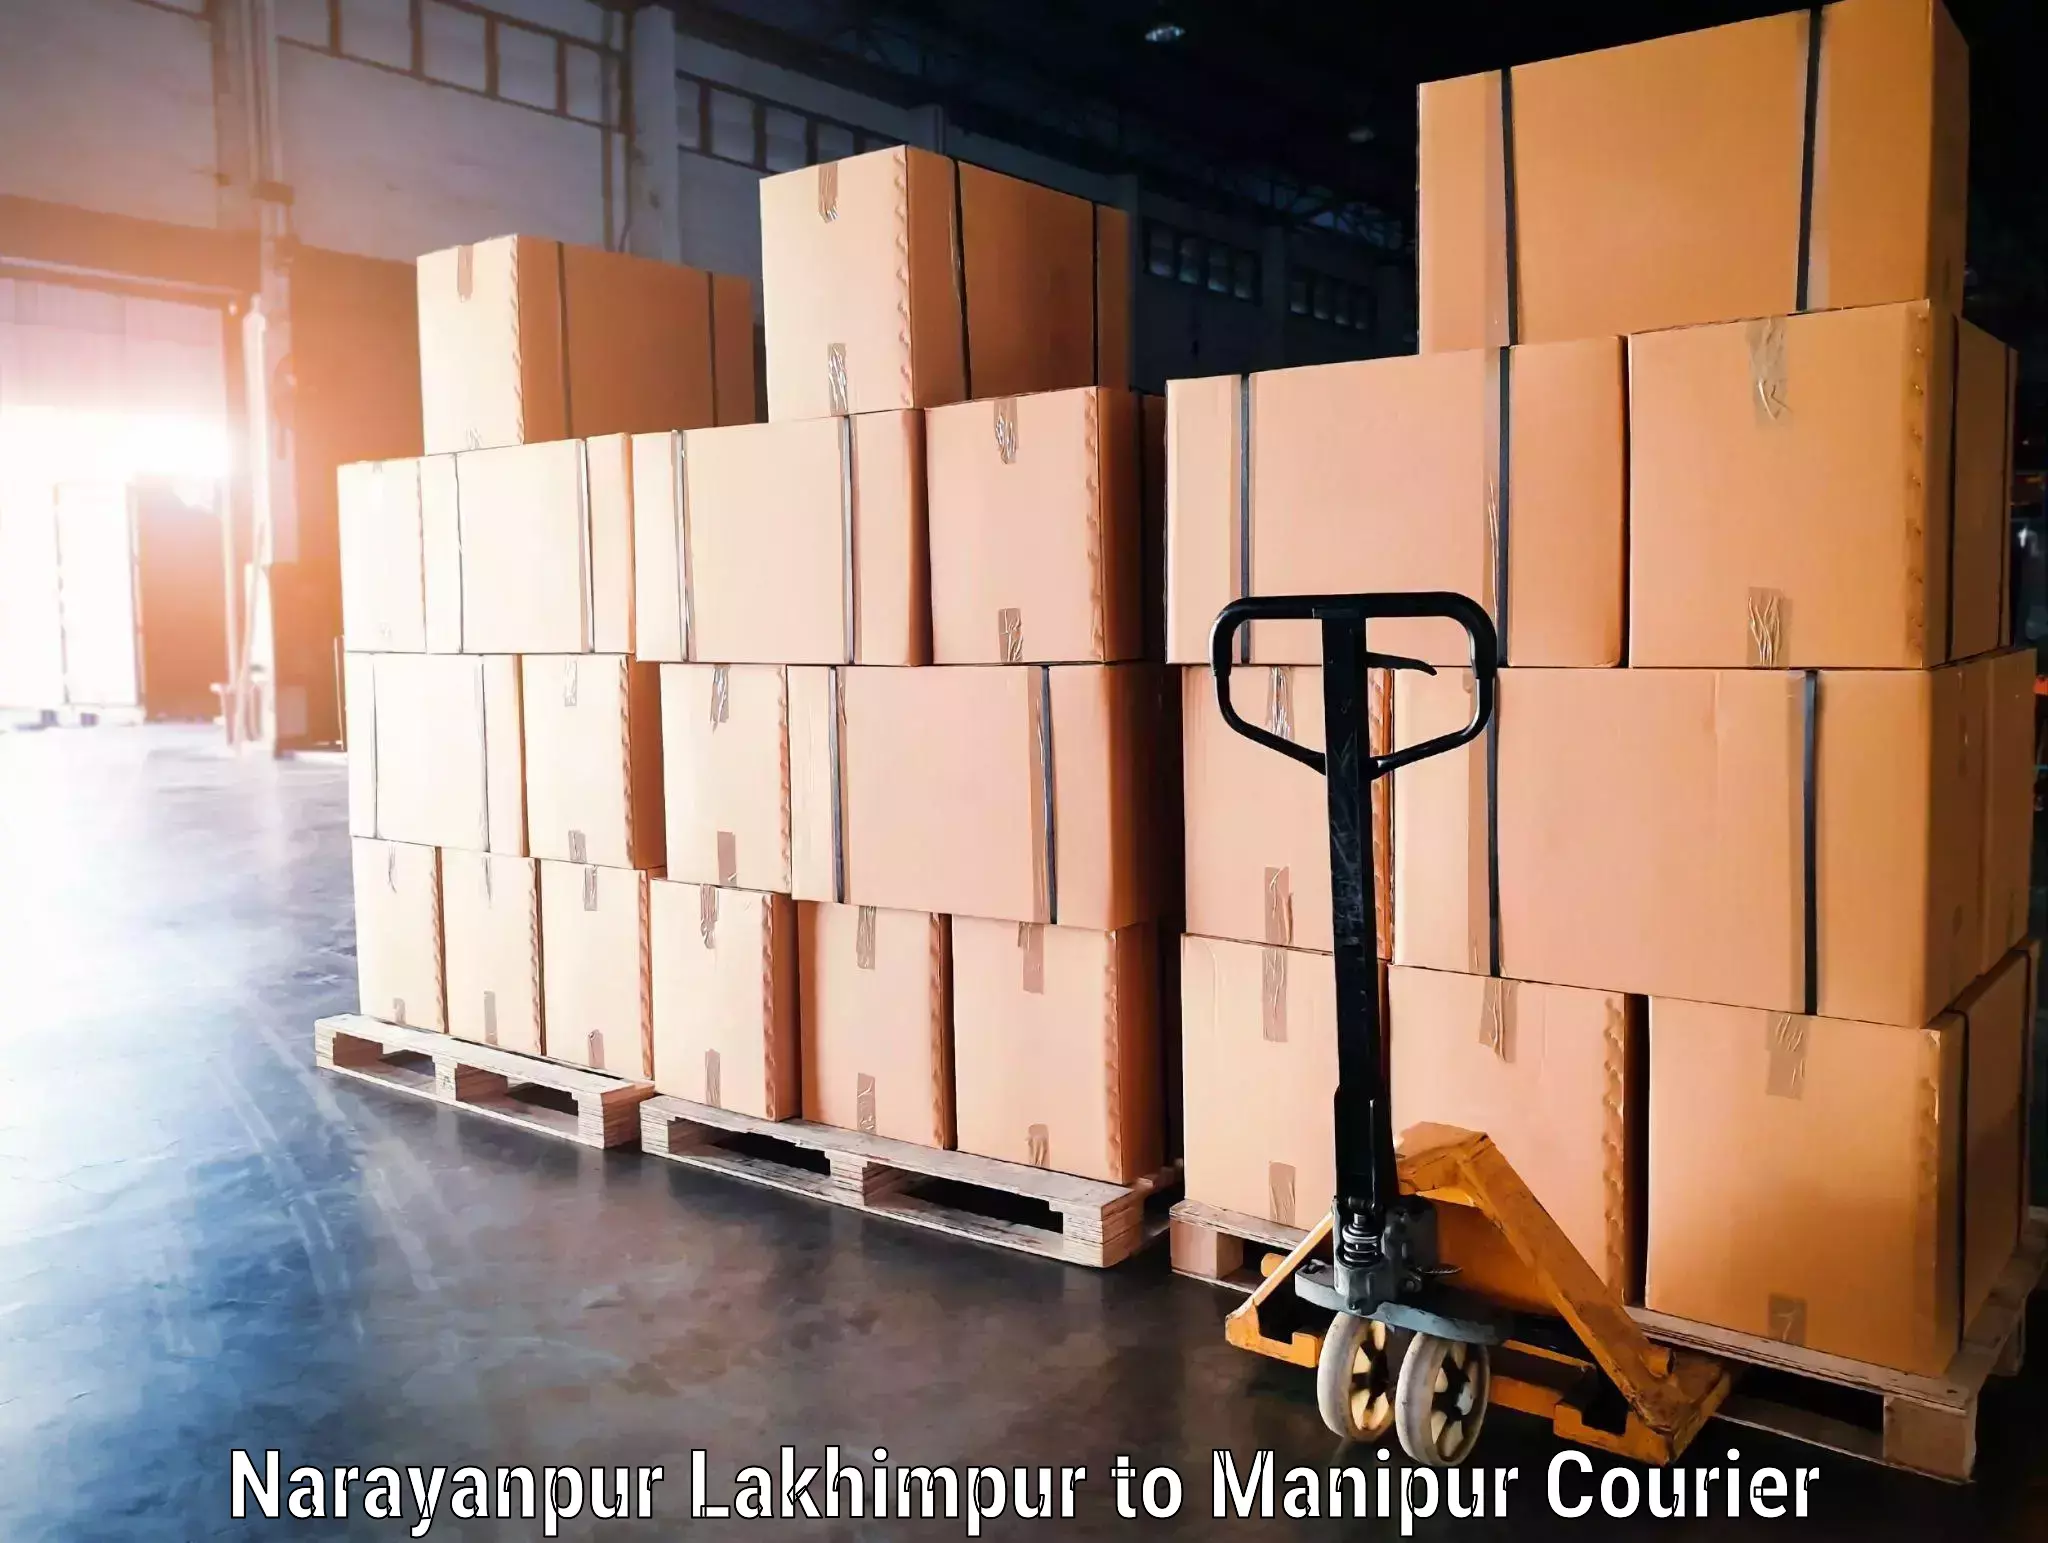 Luggage transport consultancy Narayanpur Lakhimpur to Thoubal